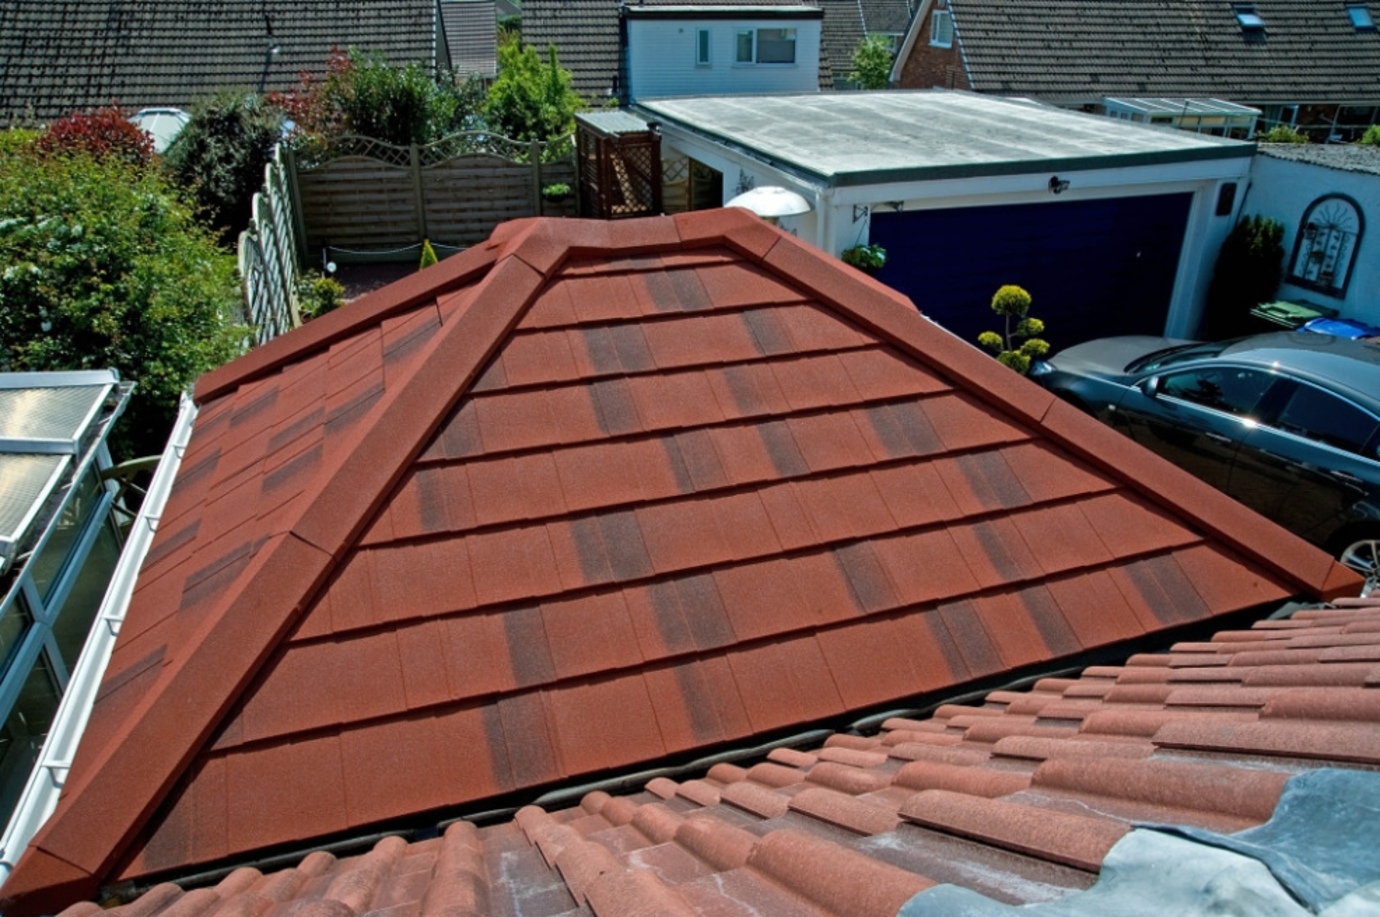 Tiled roof conversion